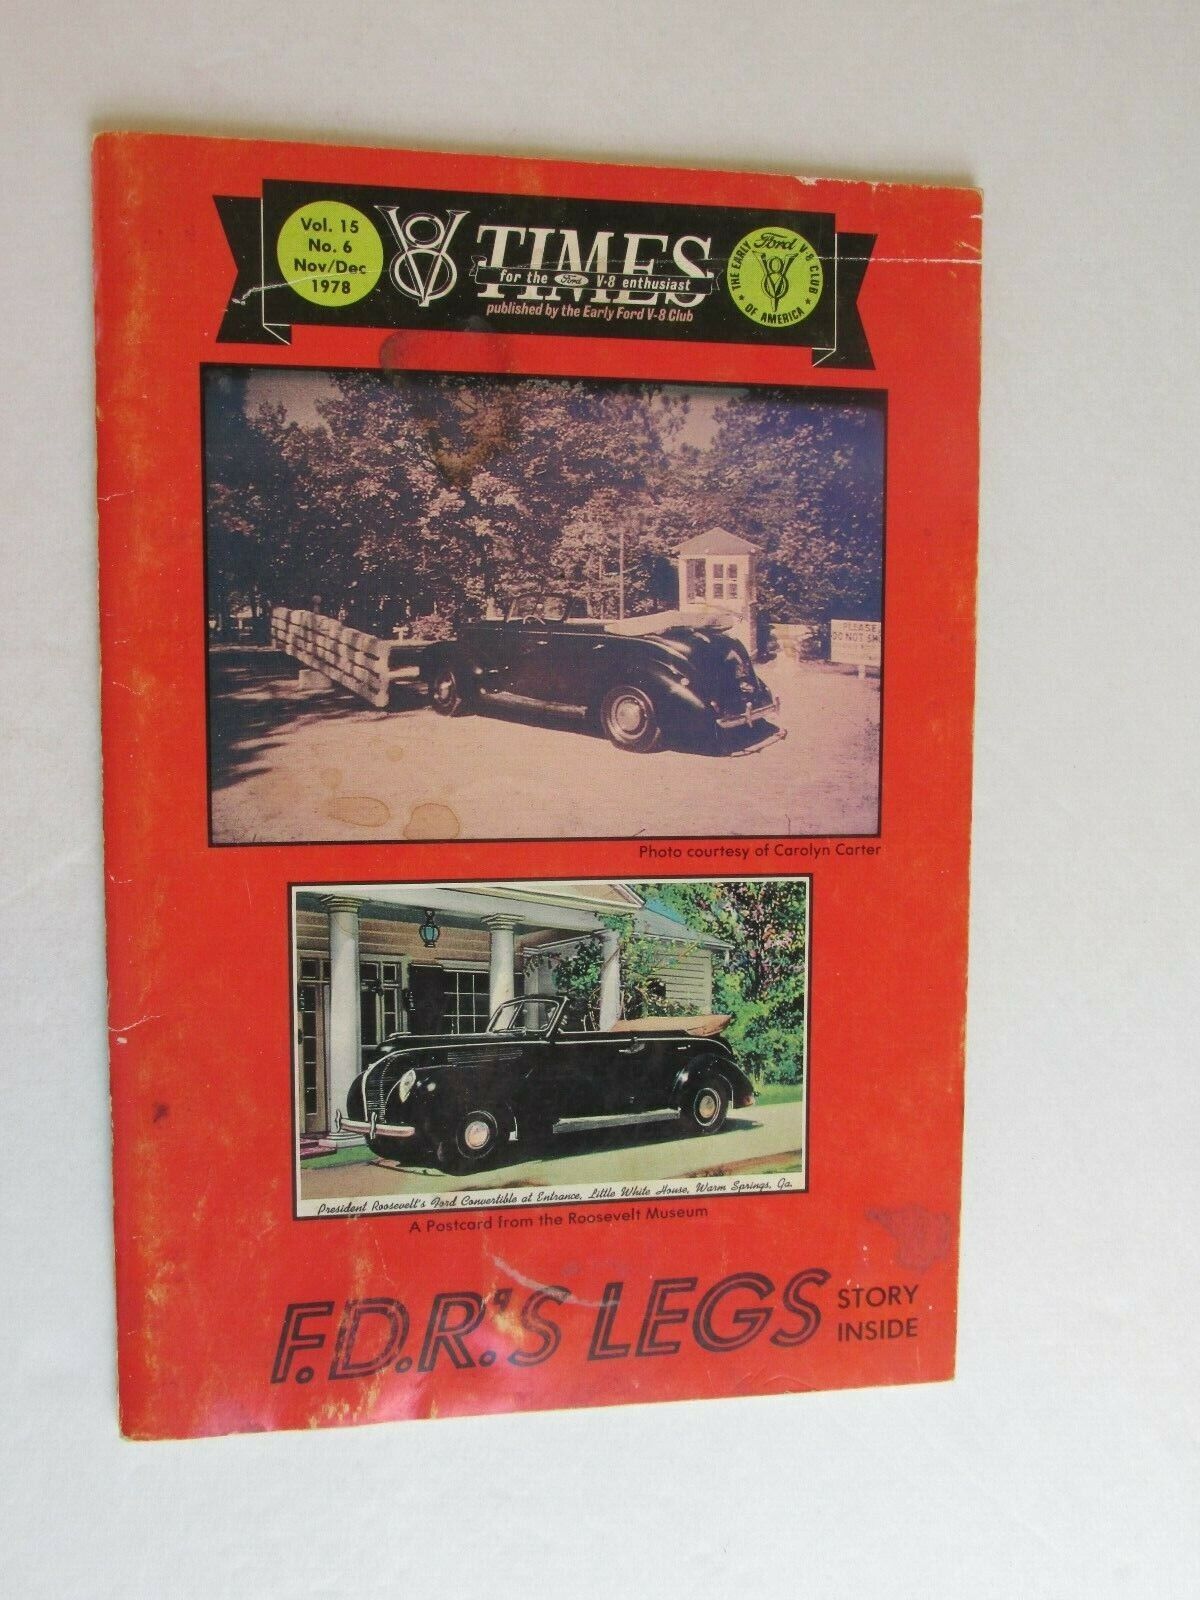 SBG30 V8 Times magazine V15 no 6 1978 plus index with torn cover